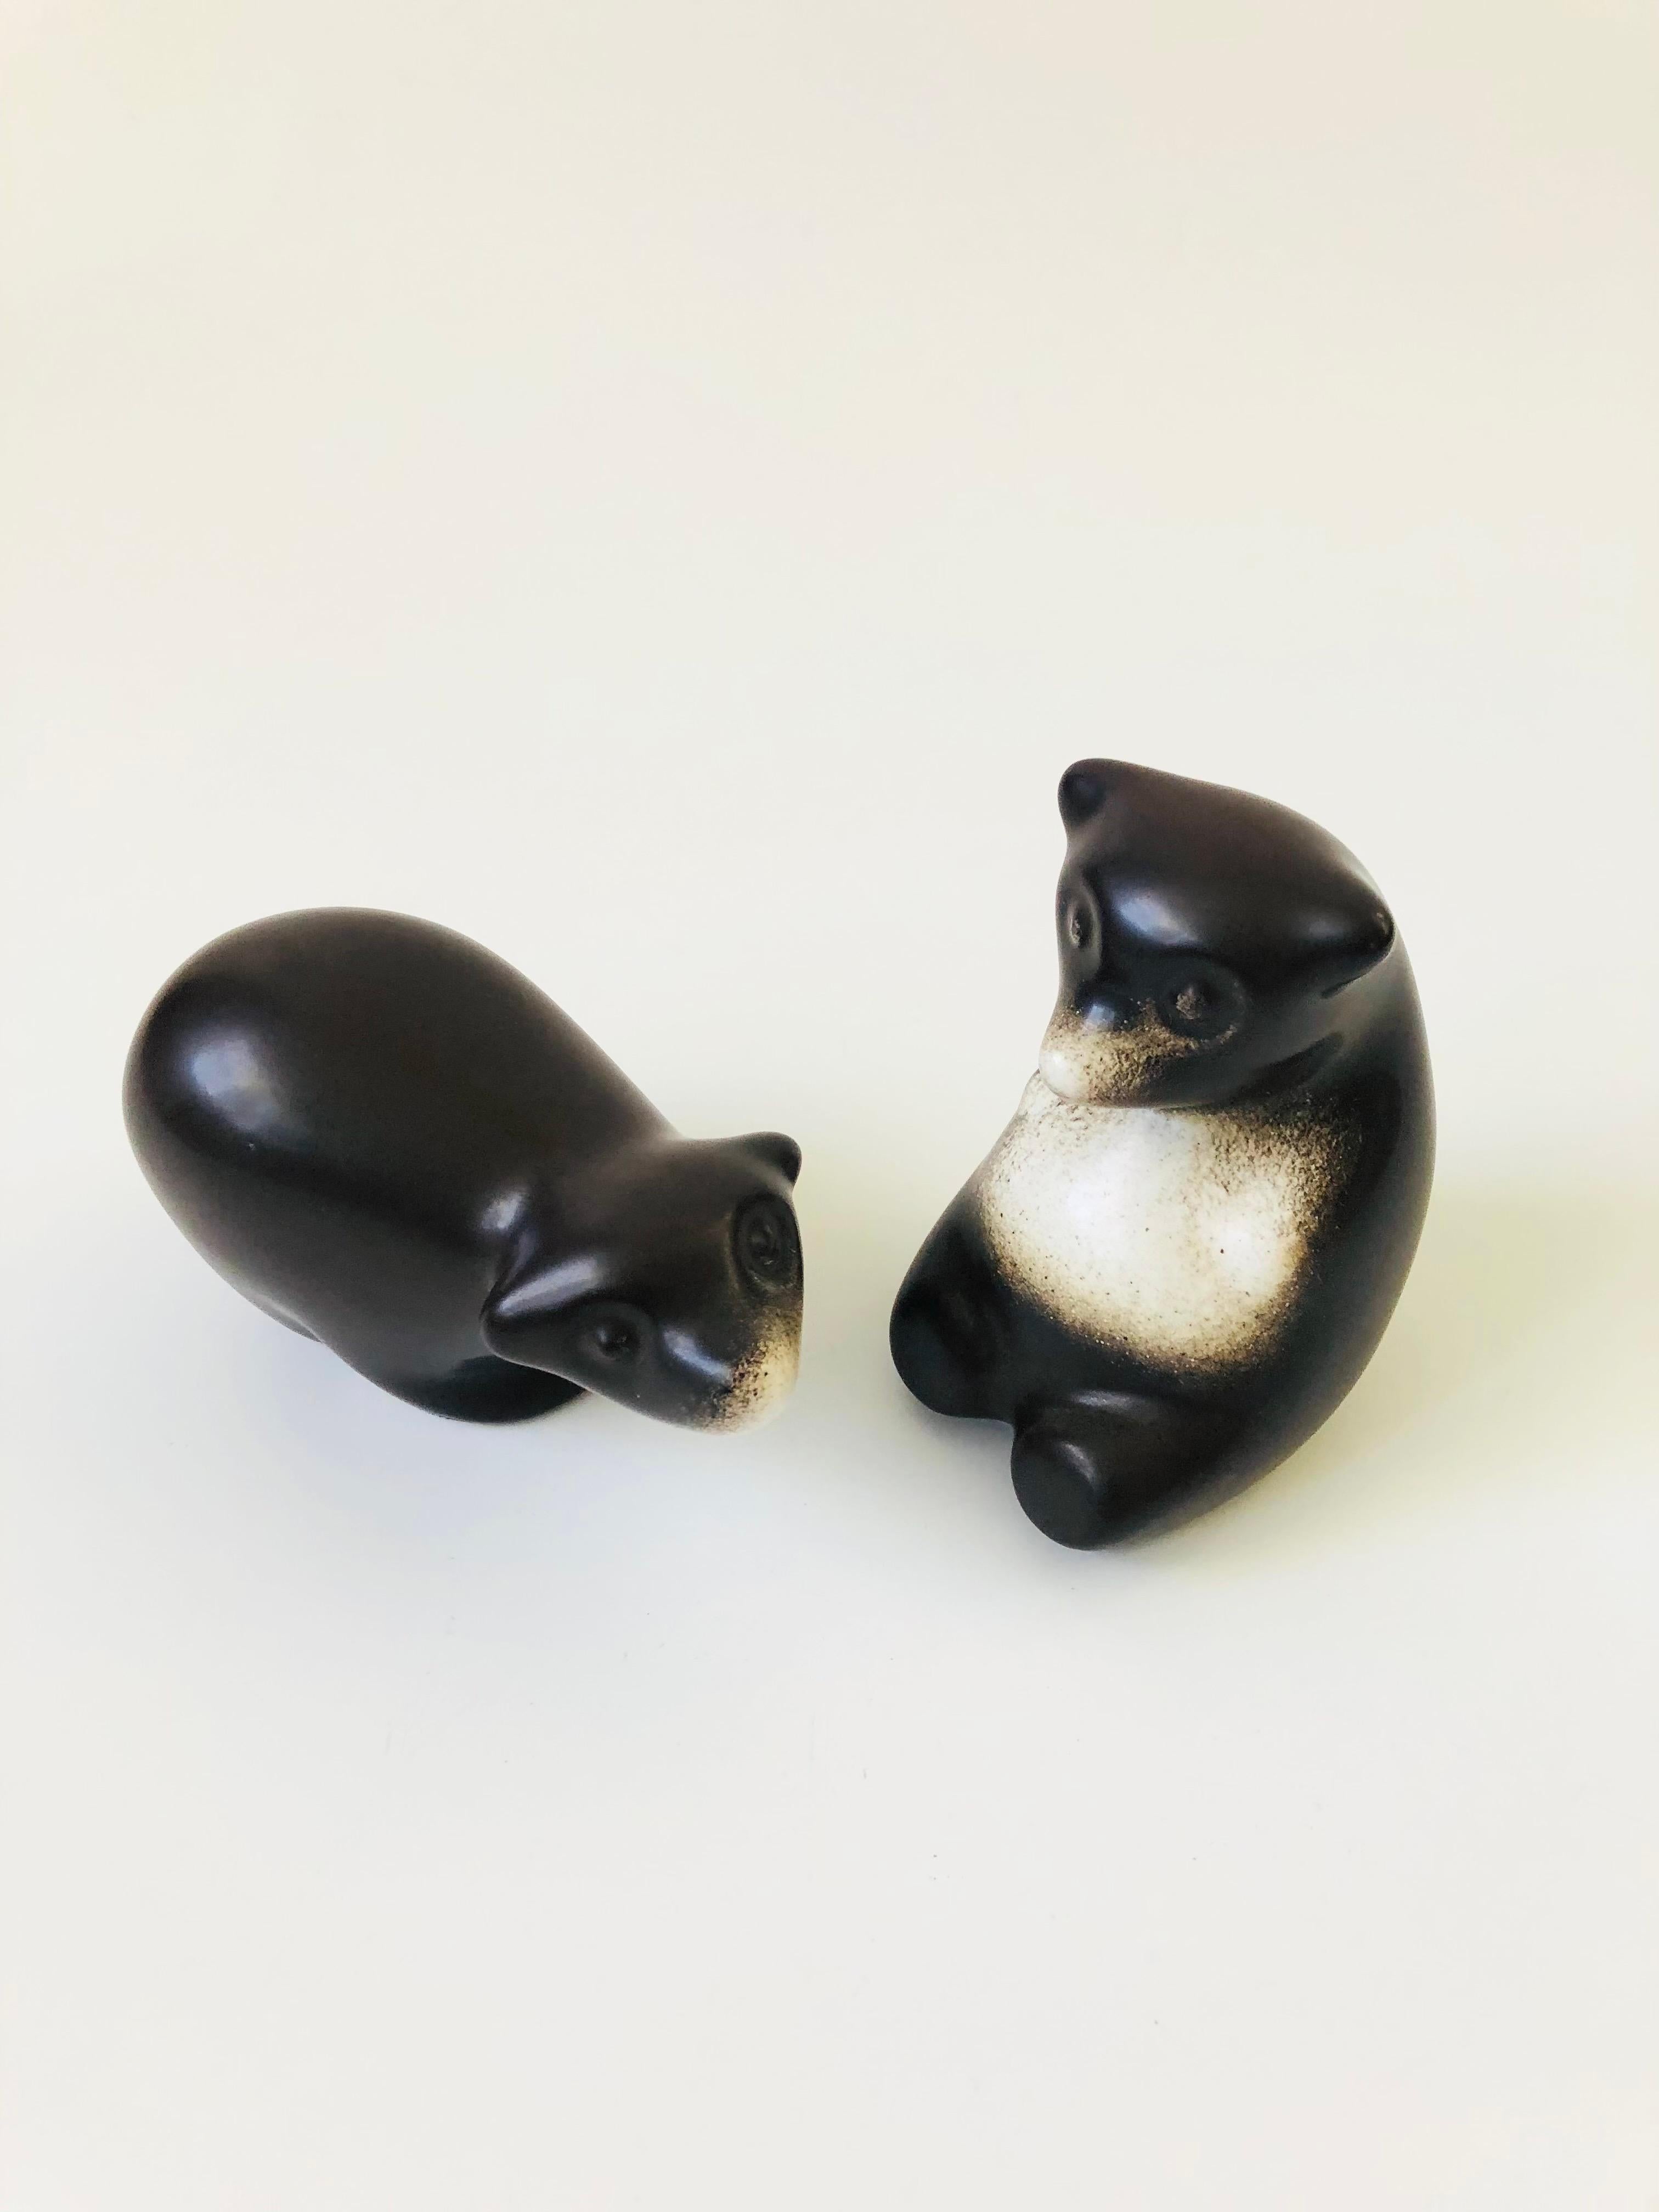 A wonderful pair of pottery bears by Howard Pierce. Beautiful signature matte glaze that fades from dark brown to off-white. One is marked 